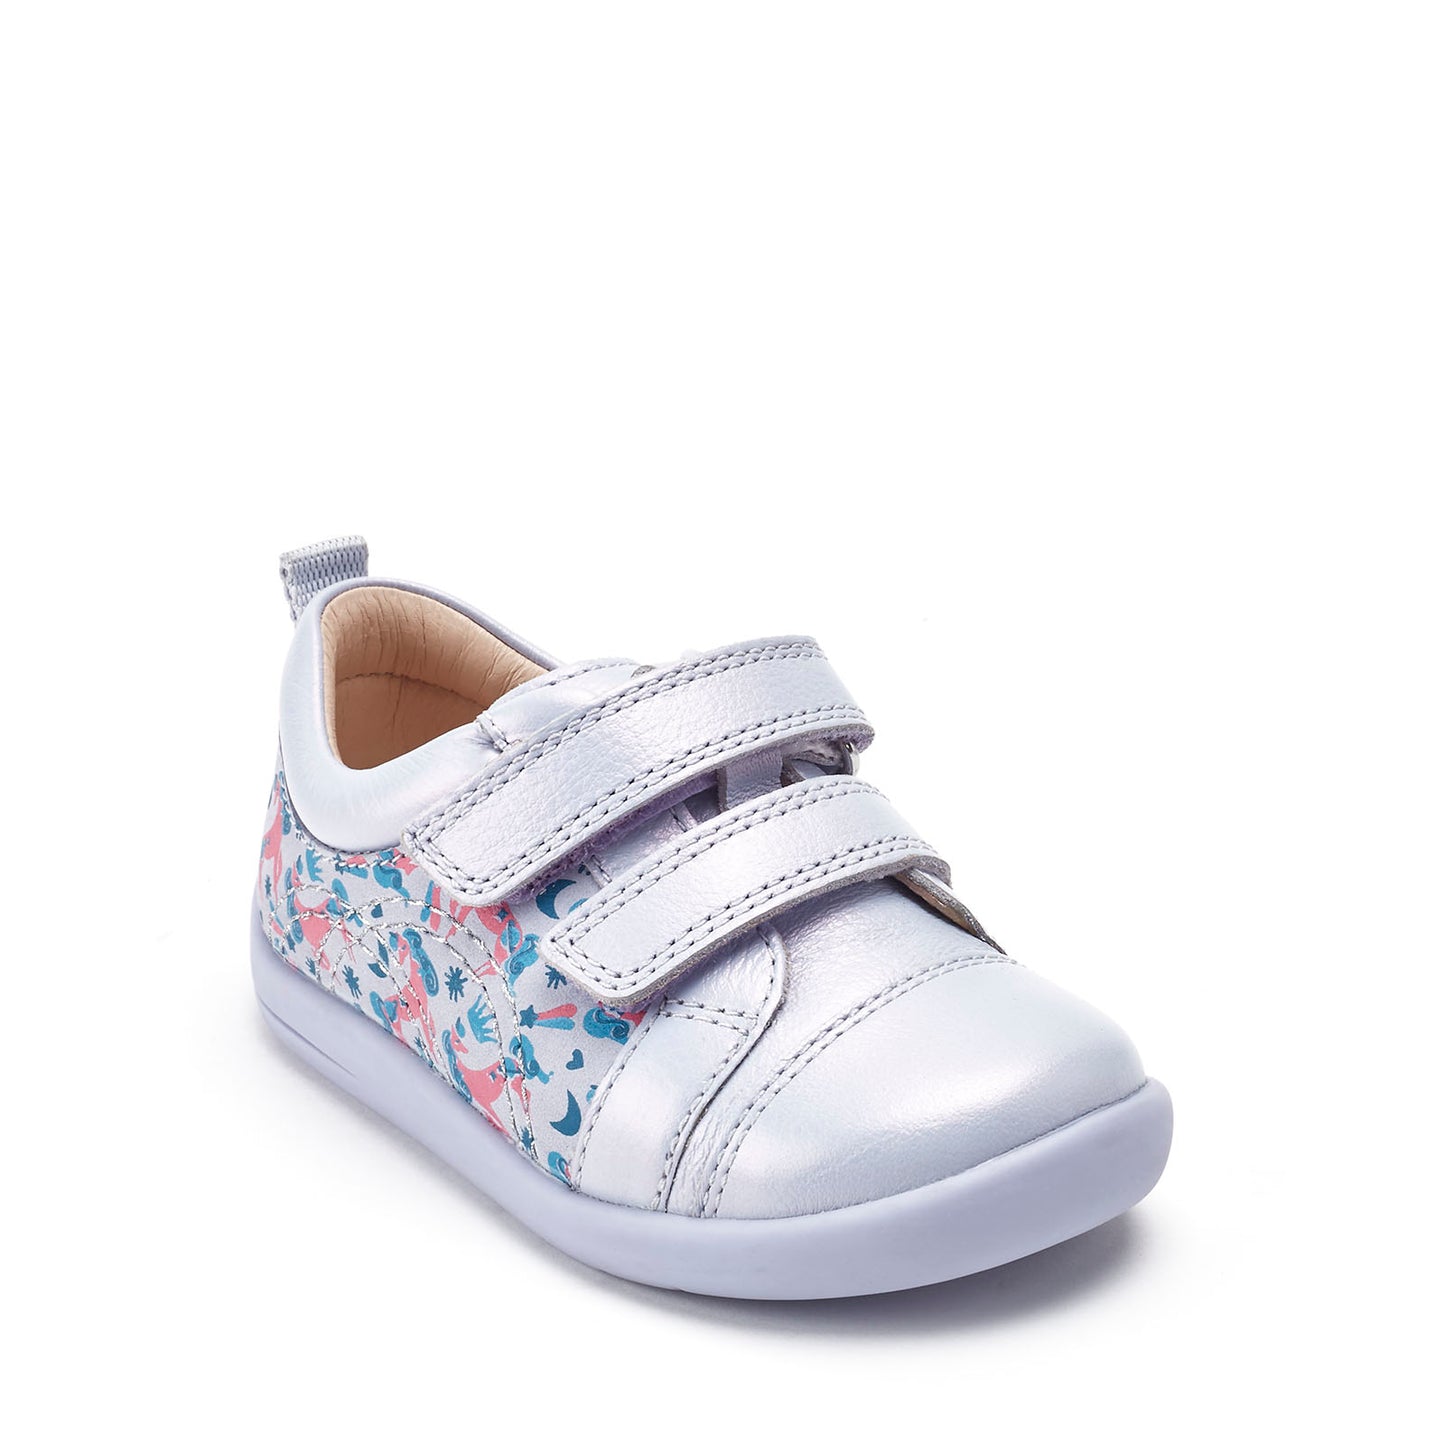 StartRite TWINKLE TOES Leather Shoes (Blue)  20-23.5